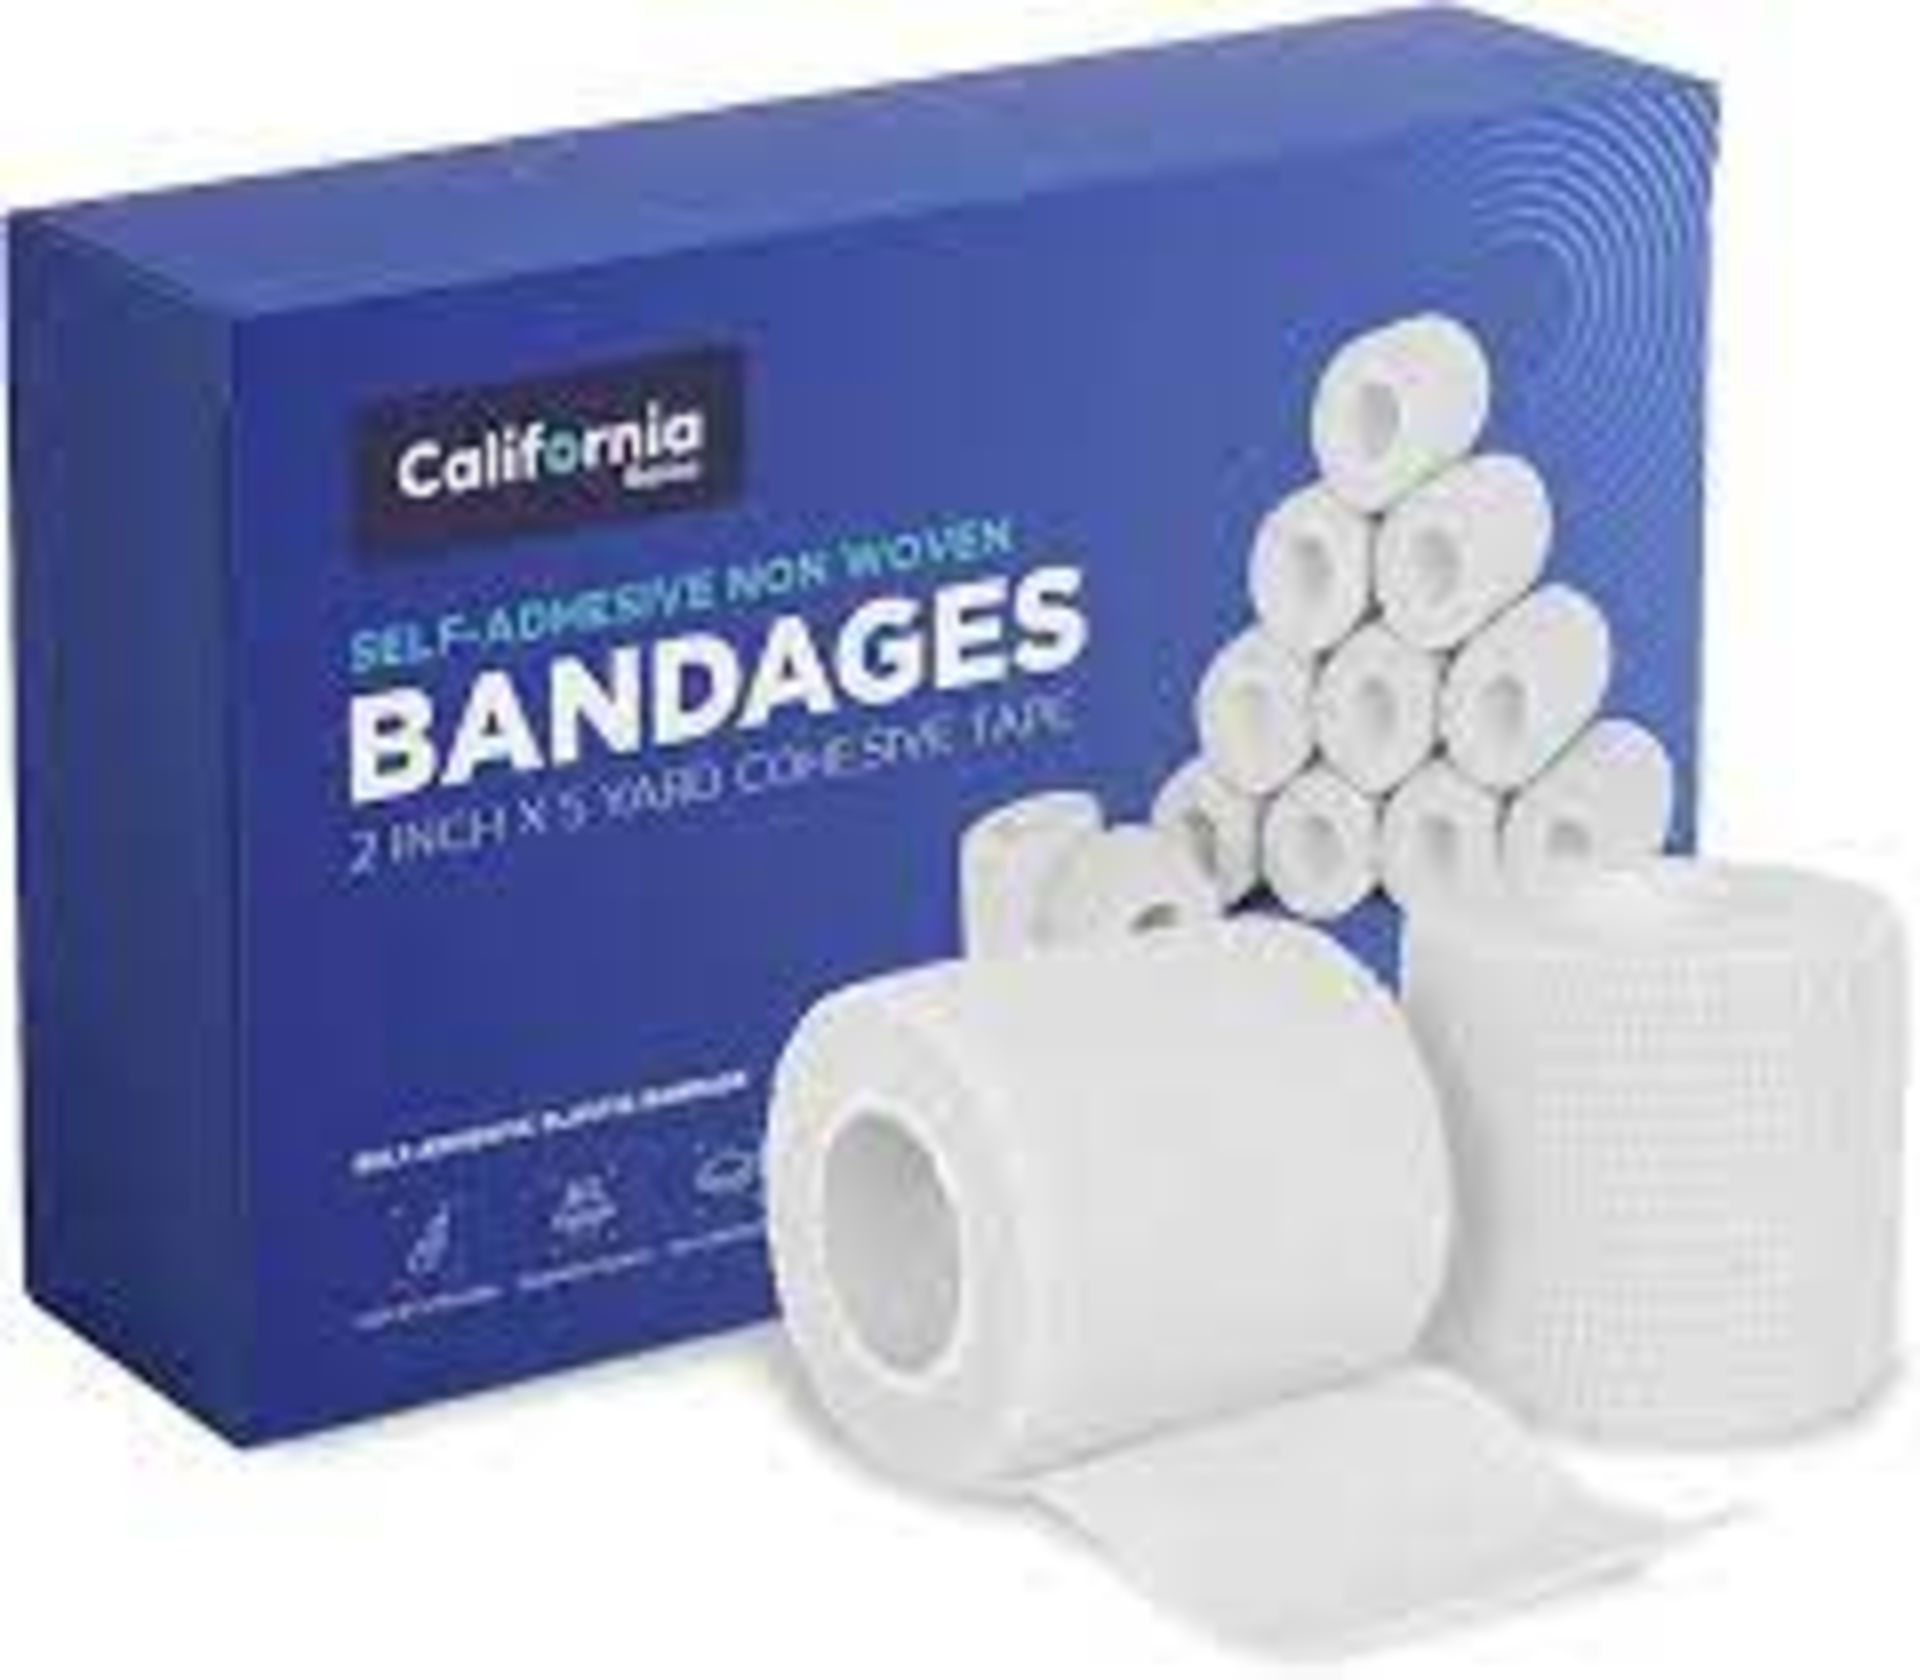 24 X BRAND NEW CALIFORNIA SETS OF 8 SELF ADHESIVE NON WOVEN BANDAGES 4 INCH X 5 YARD COHESIVE TAPE - Image 3 of 3